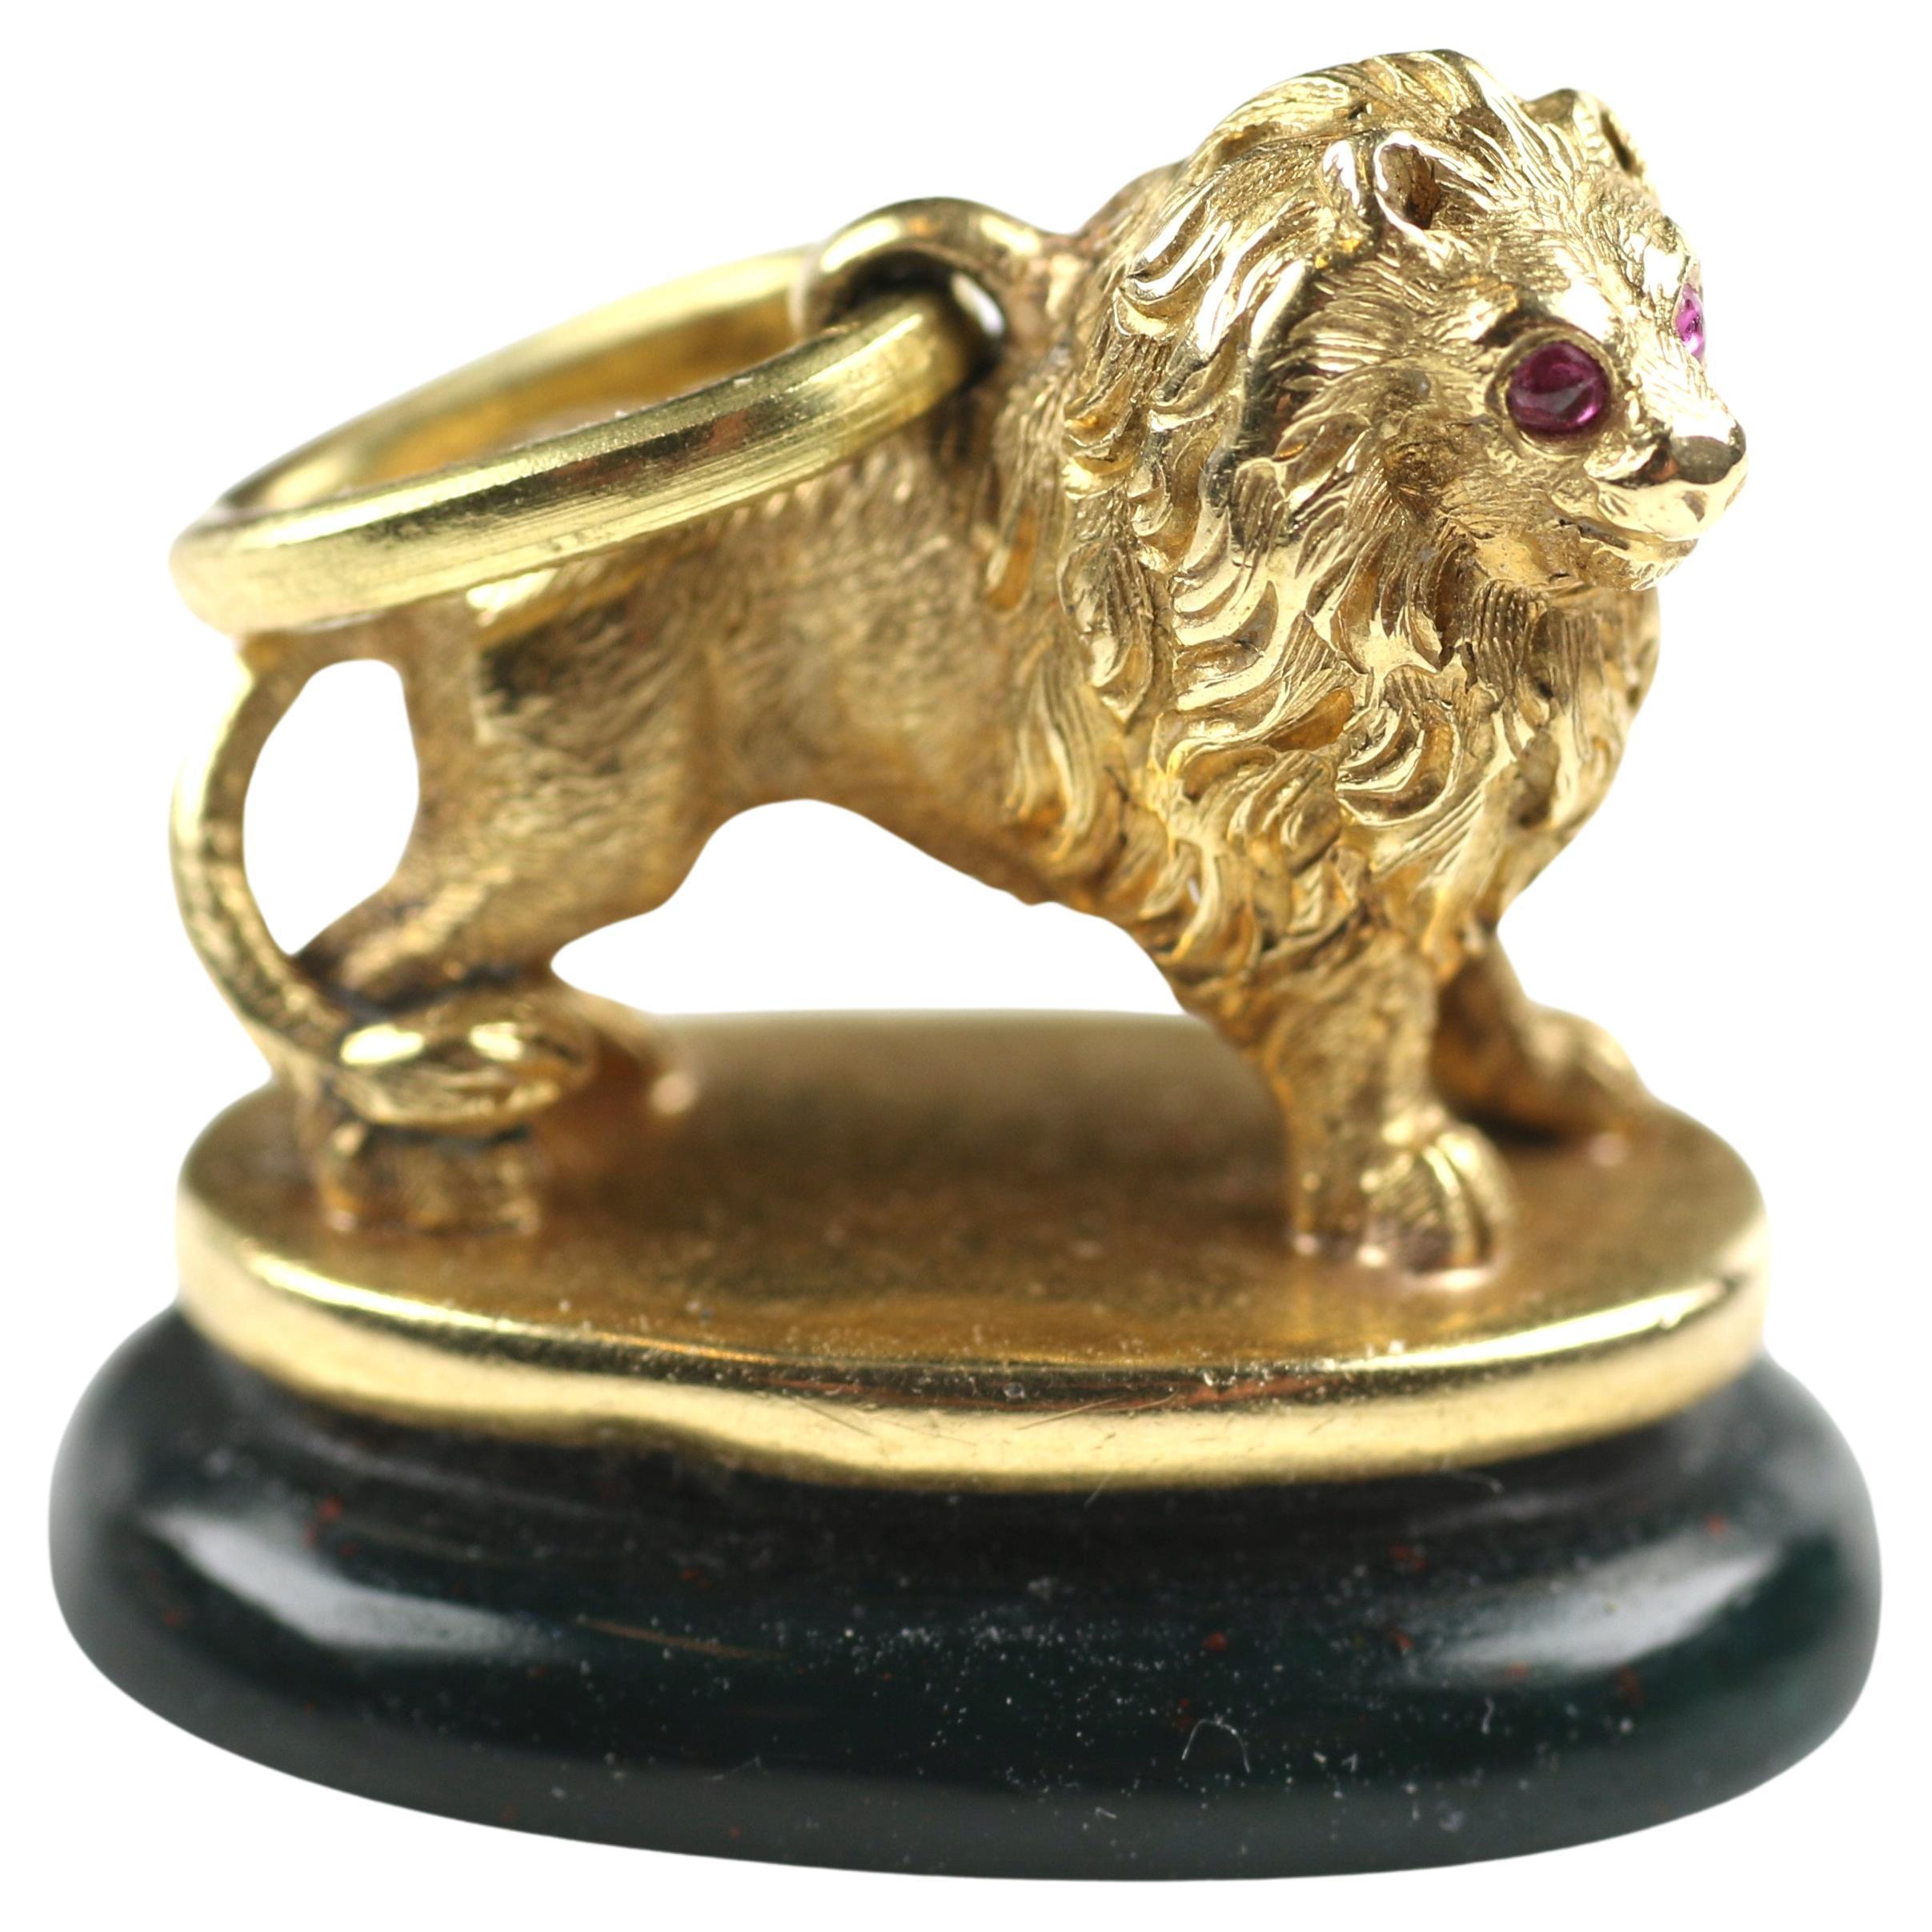 Antique Heliotrope Seal Fob Pendant with 18K Gold Lion